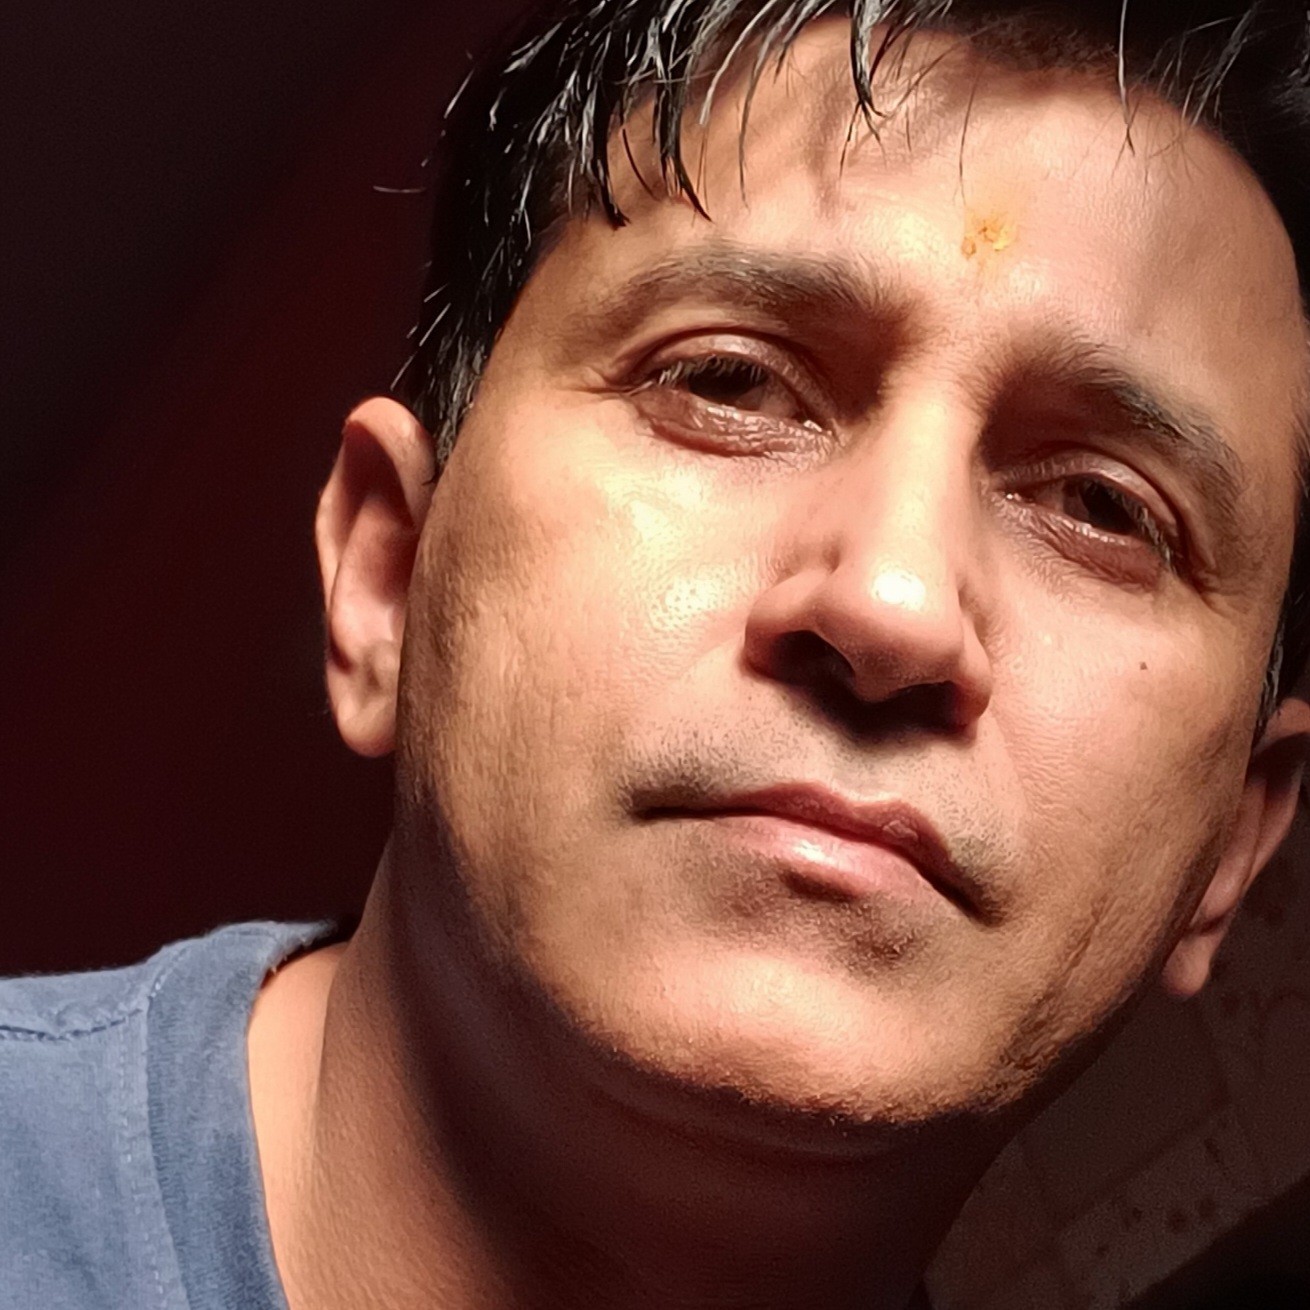 Profile photo for Pardeep mohan Pathak